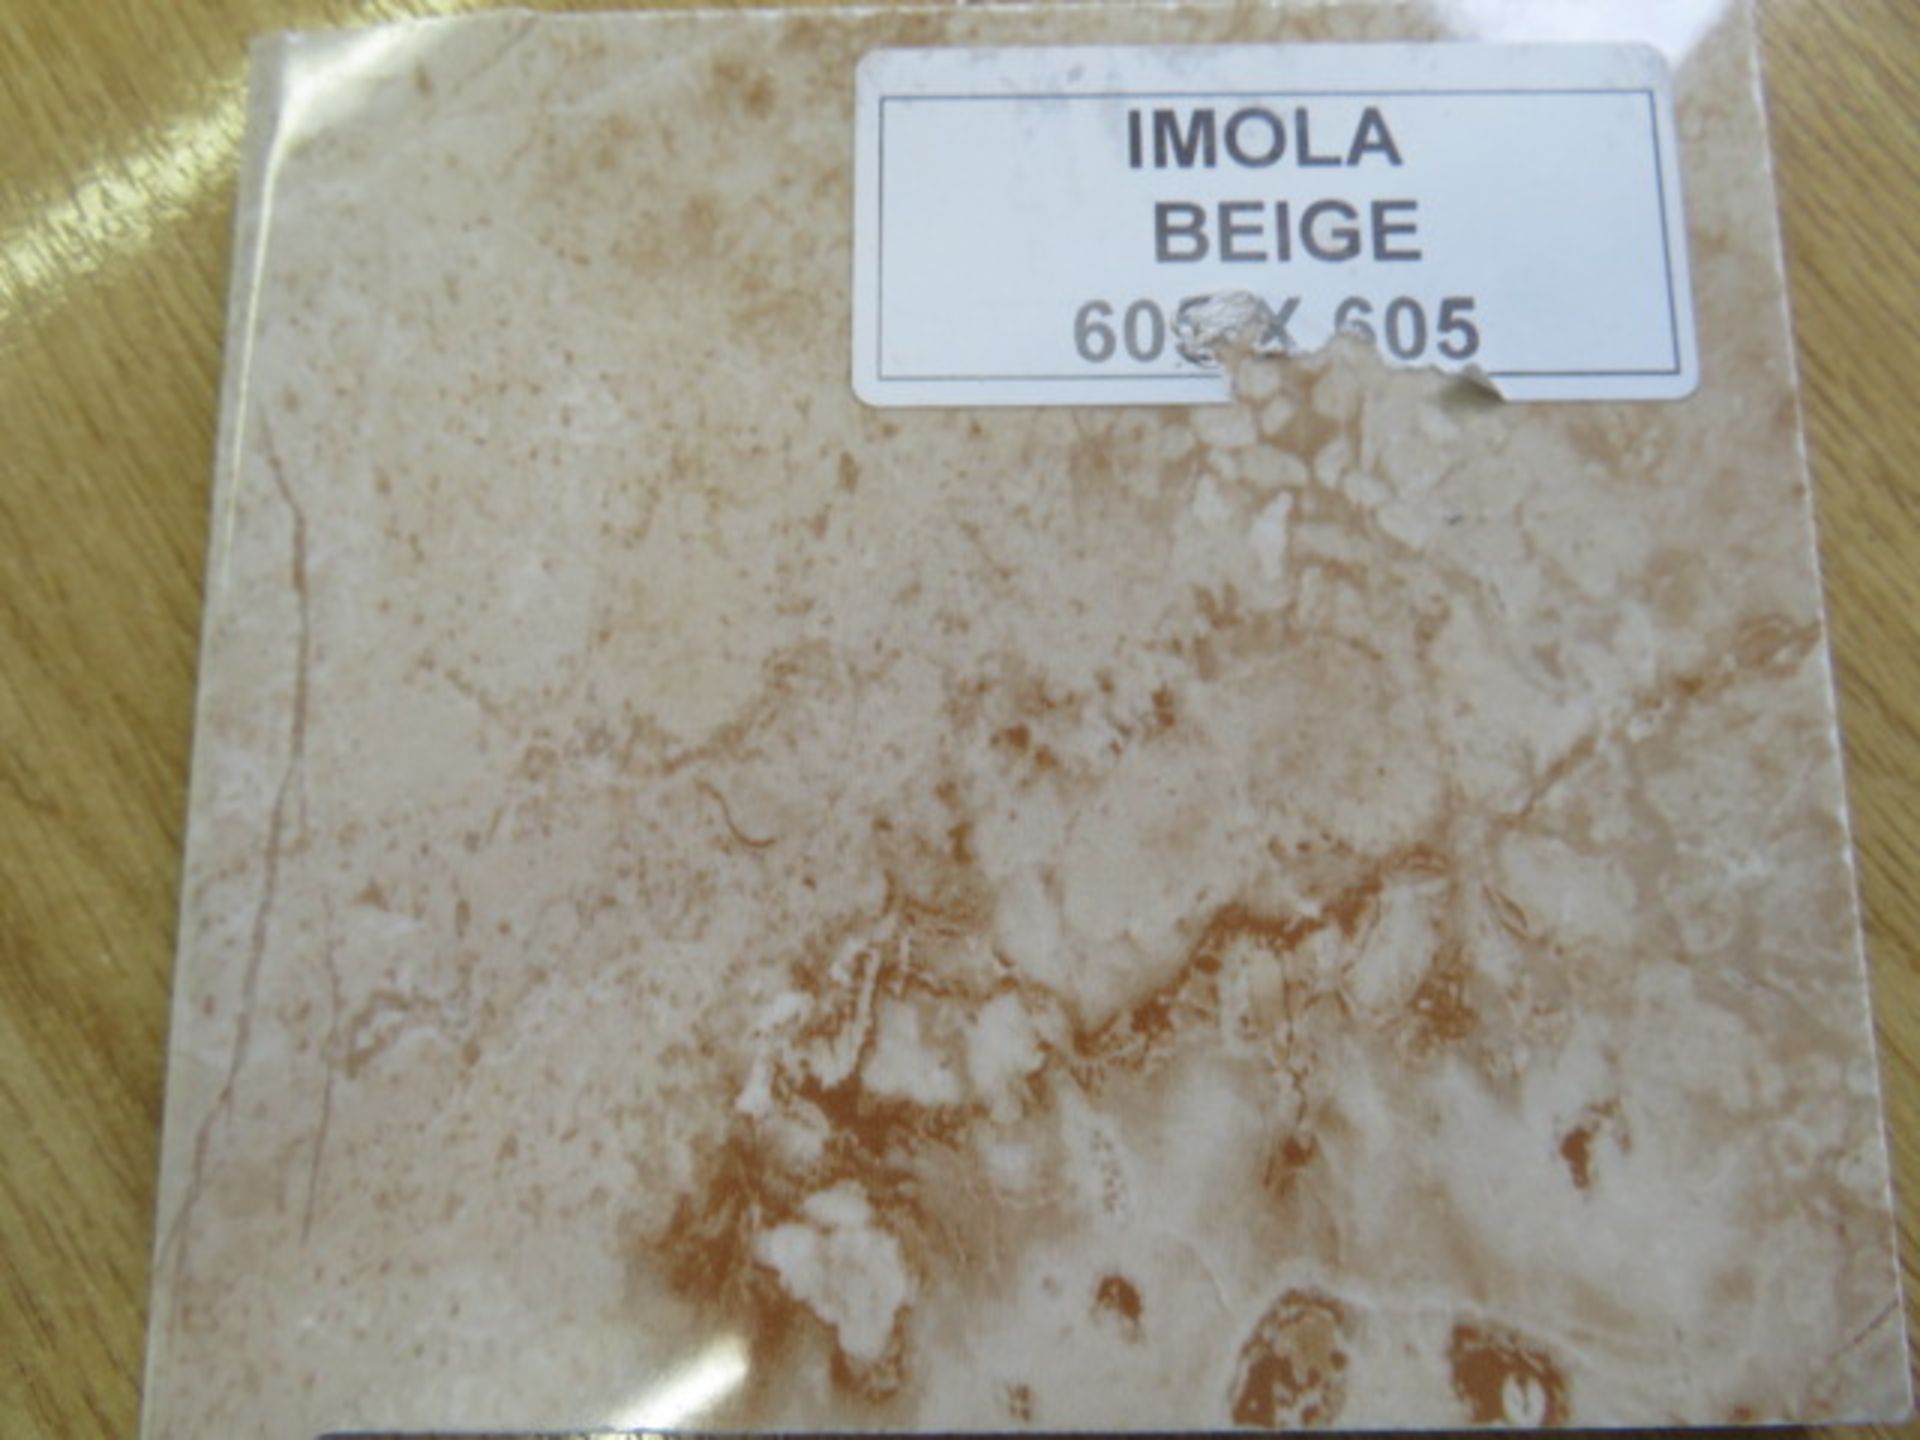 NEW 8.76 Square Meters of Imola Beige Wall and Floor Tiles. 605x605mm per tile, 10mm thick. Thi... - Image 3 of 4